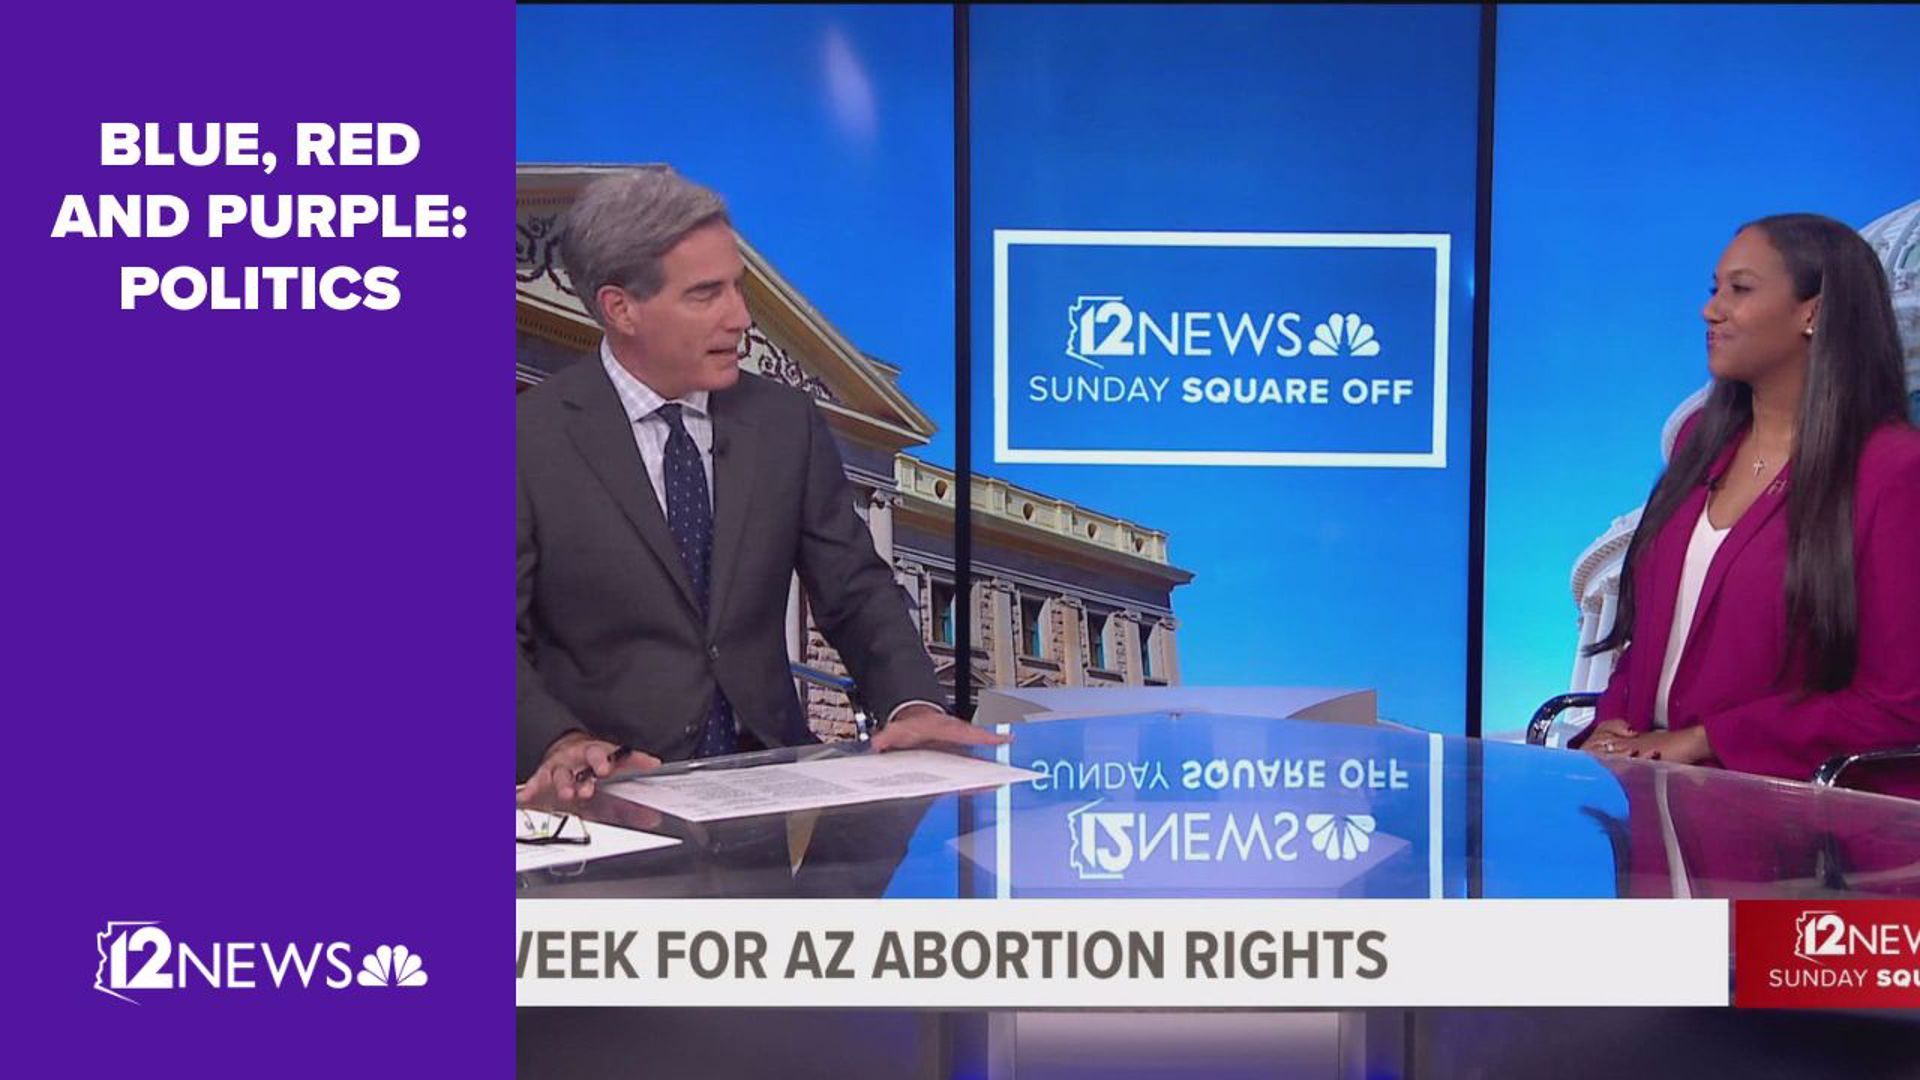 The fate of abortion rights in Arizona is back in the news this week. A Pima County judge could issue a landmark decision on the state's 158-year-old abortion ban.